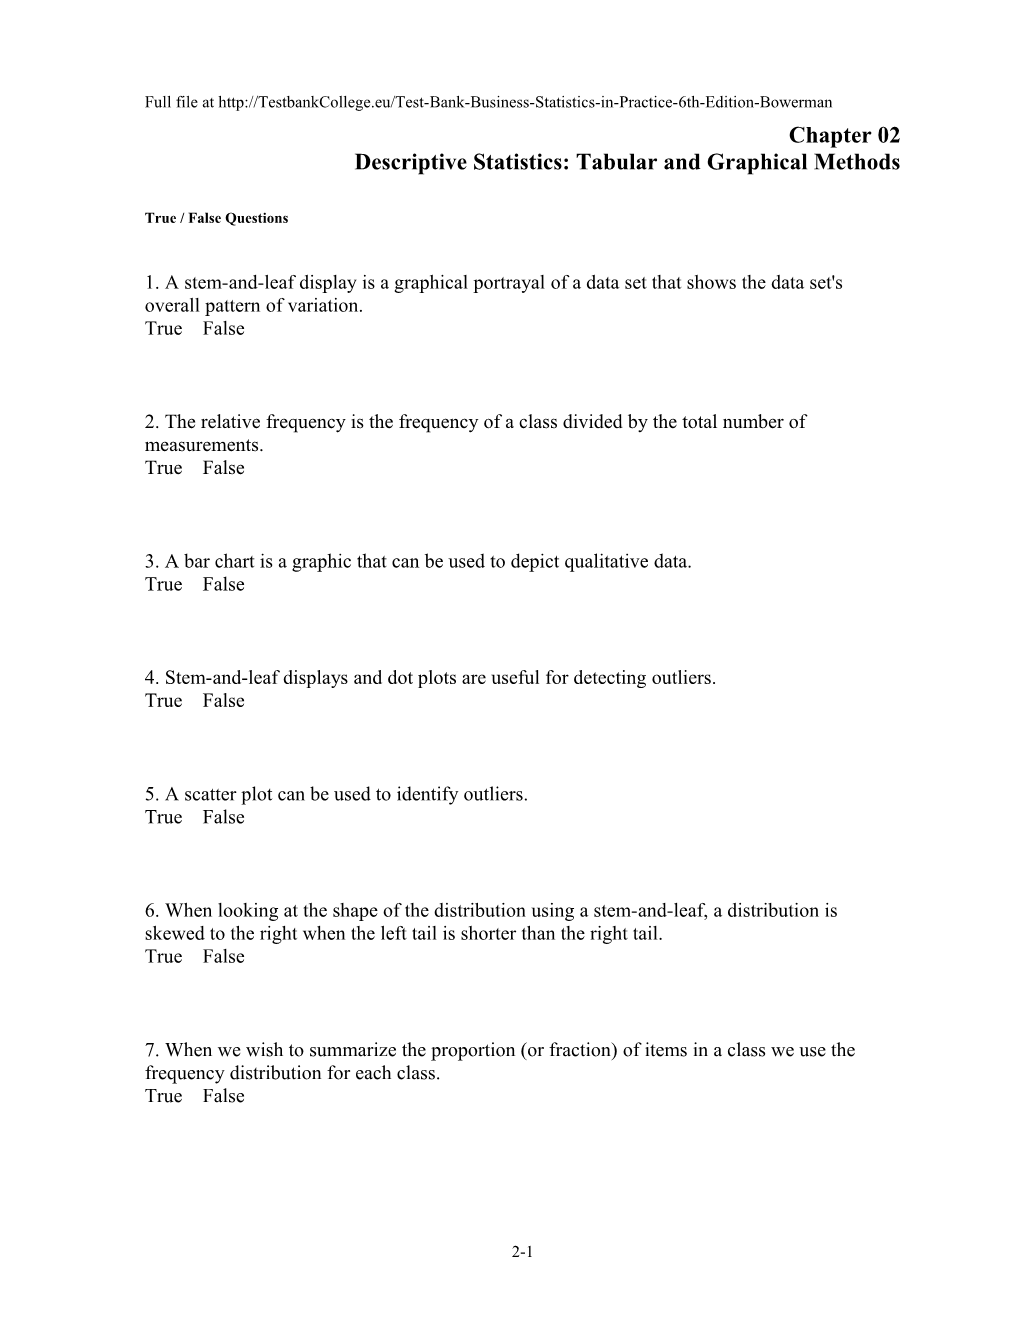 Chapter 02 Descriptive Statistics: Tabular and Graphical Methods